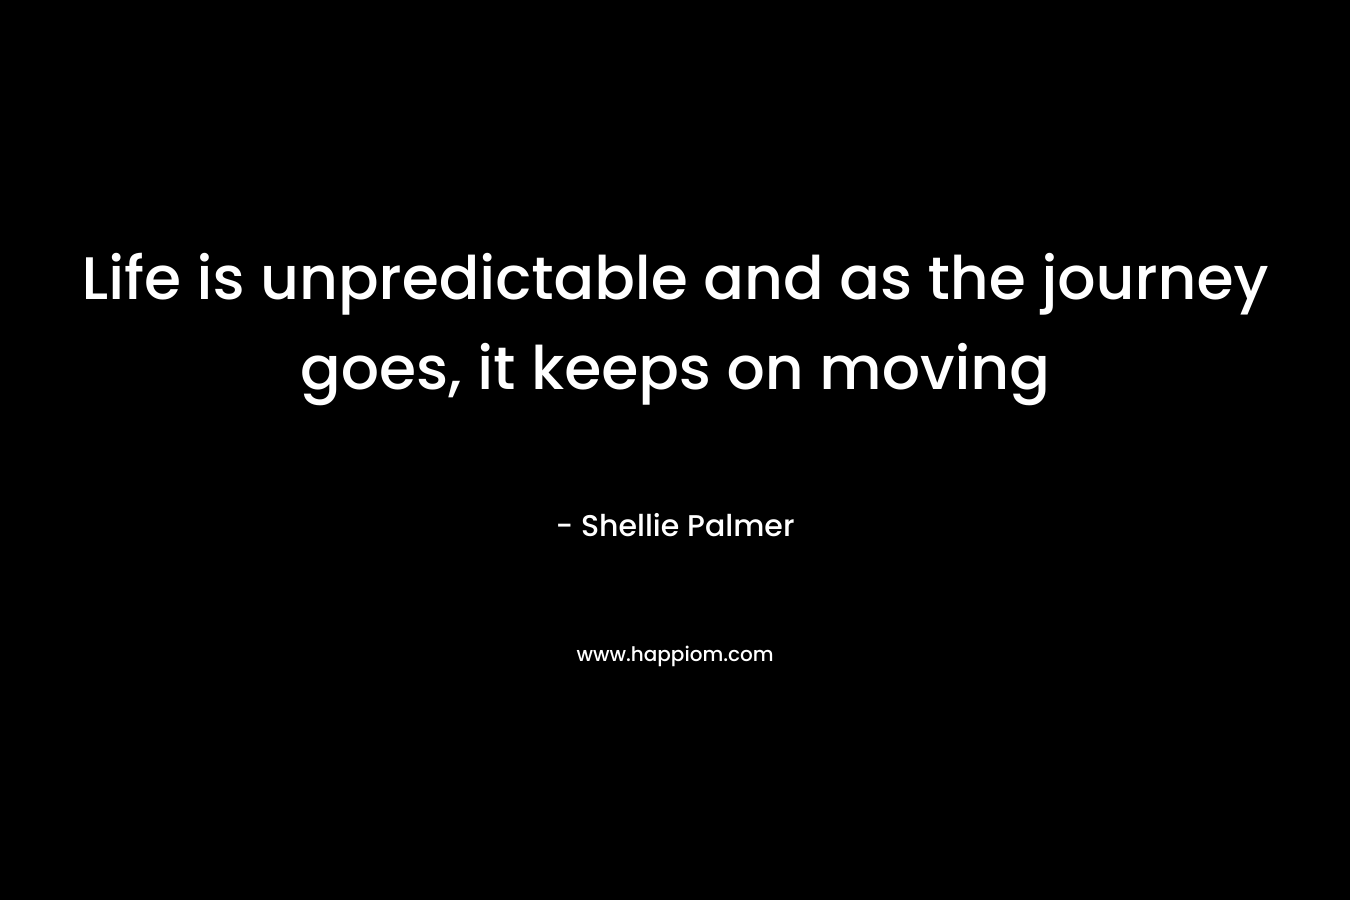 Life is unpredictable and as the journey goes, it keeps on moving – Shellie Palmer